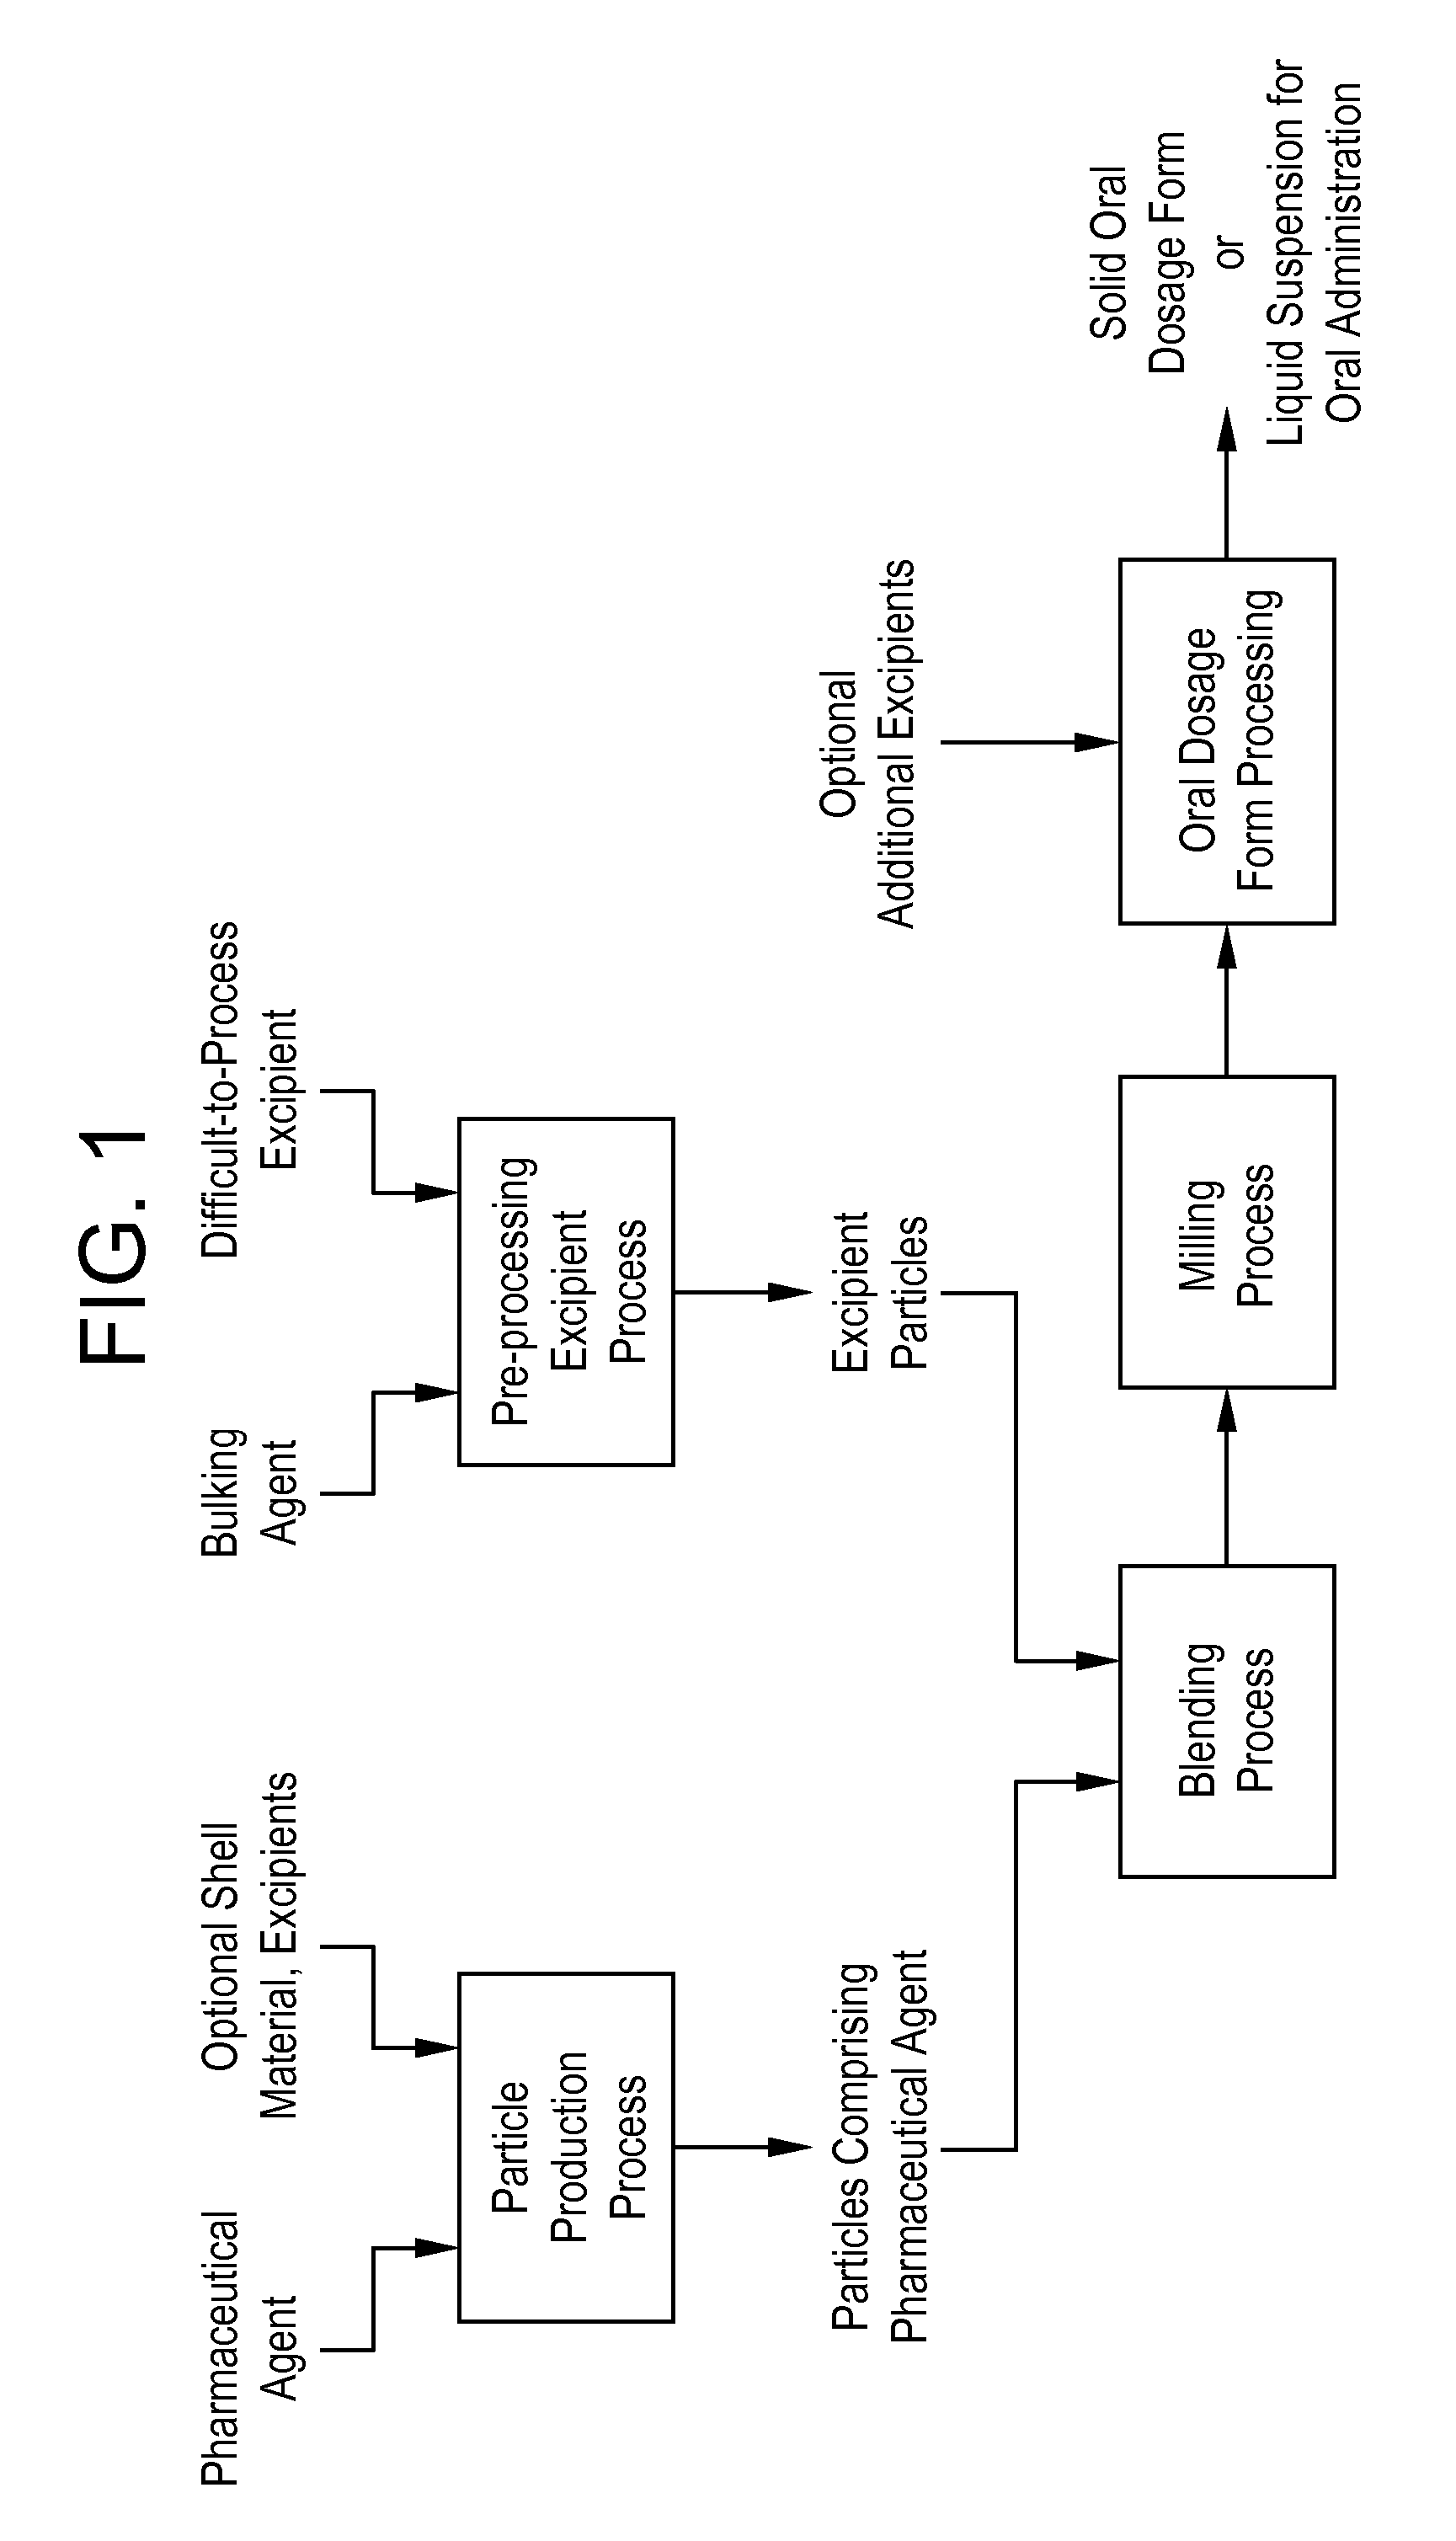 Processes for making particle-based pharmaceutical formulations for oral administration